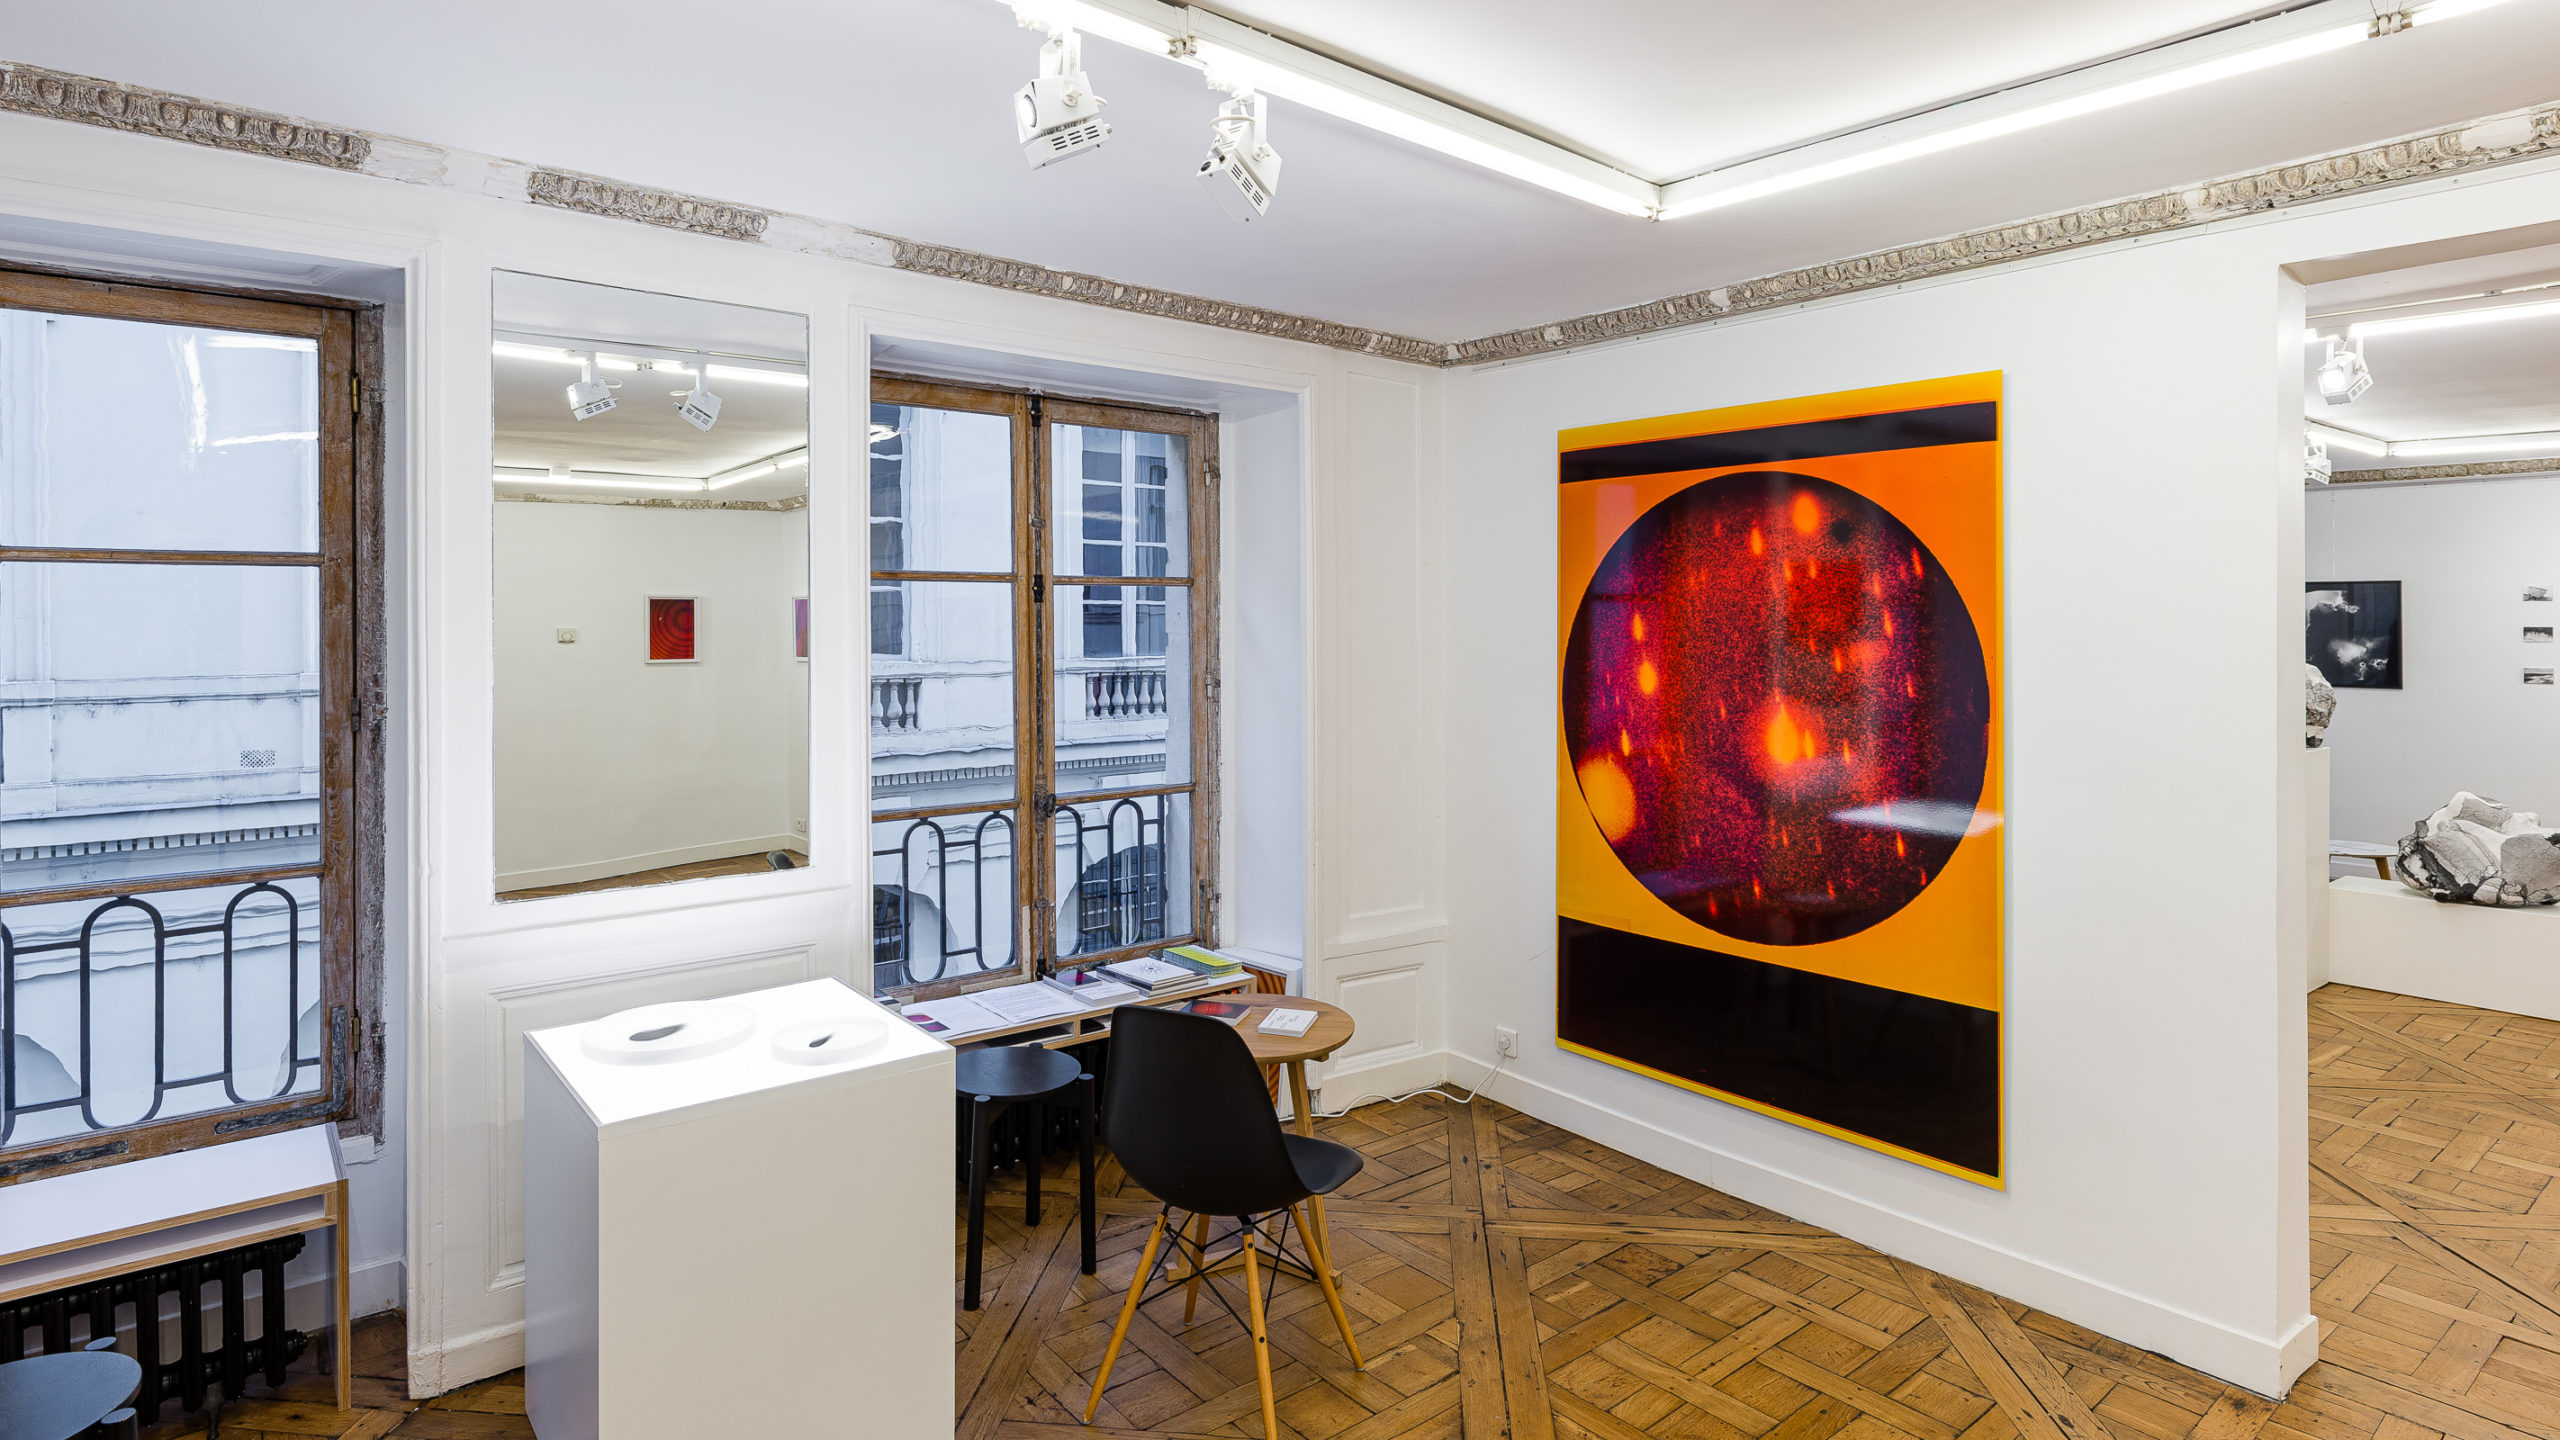 Installation view of Caroline Corbasson's exhibition, with Andrea Montano, called Pollen, at Galerie l'inlassable for Photo Saint Germain 2021. Work entitled "Pollen"